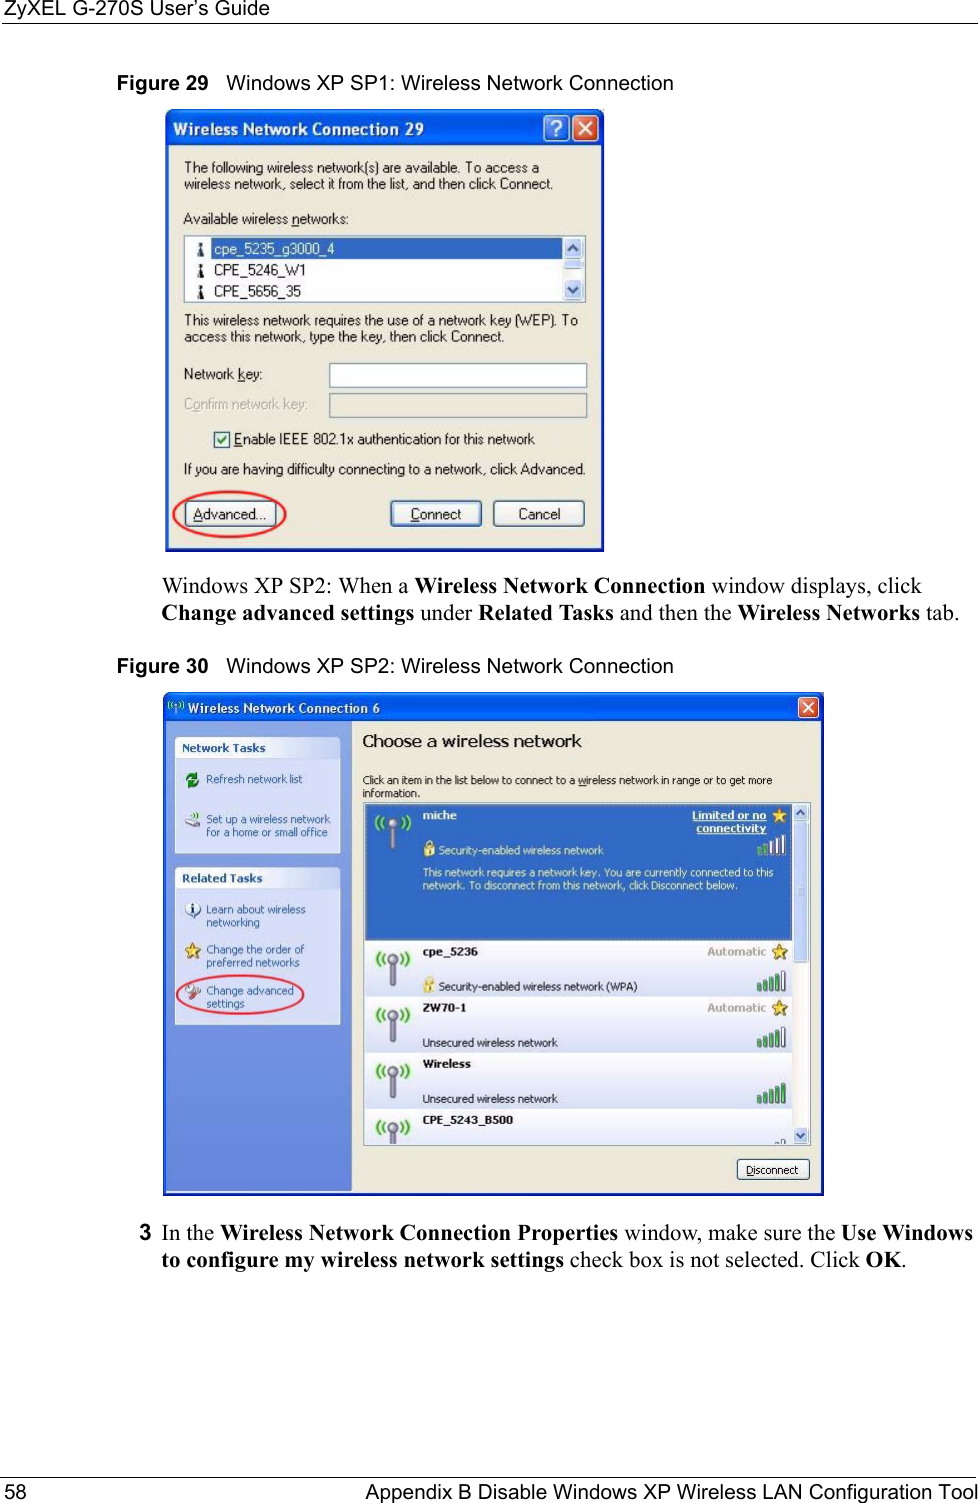 ZyXEL G-270S User’s Guide58 Appendix B Disable Windows XP Wireless LAN Configuration ToolFigure 29   Windows XP SP1: Wireless Network ConnectionWindows XP SP2: When a Wireless Network Connection window displays, click Change advanced settings under Related Tasks and then the Wireless Networks tab.Figure 30   Windows XP SP2: Wireless Network Connection3In the Wireless Network Connection Properties window, make sure the Use Windows to configure my wireless network settings check box is not selected. Click OK. 